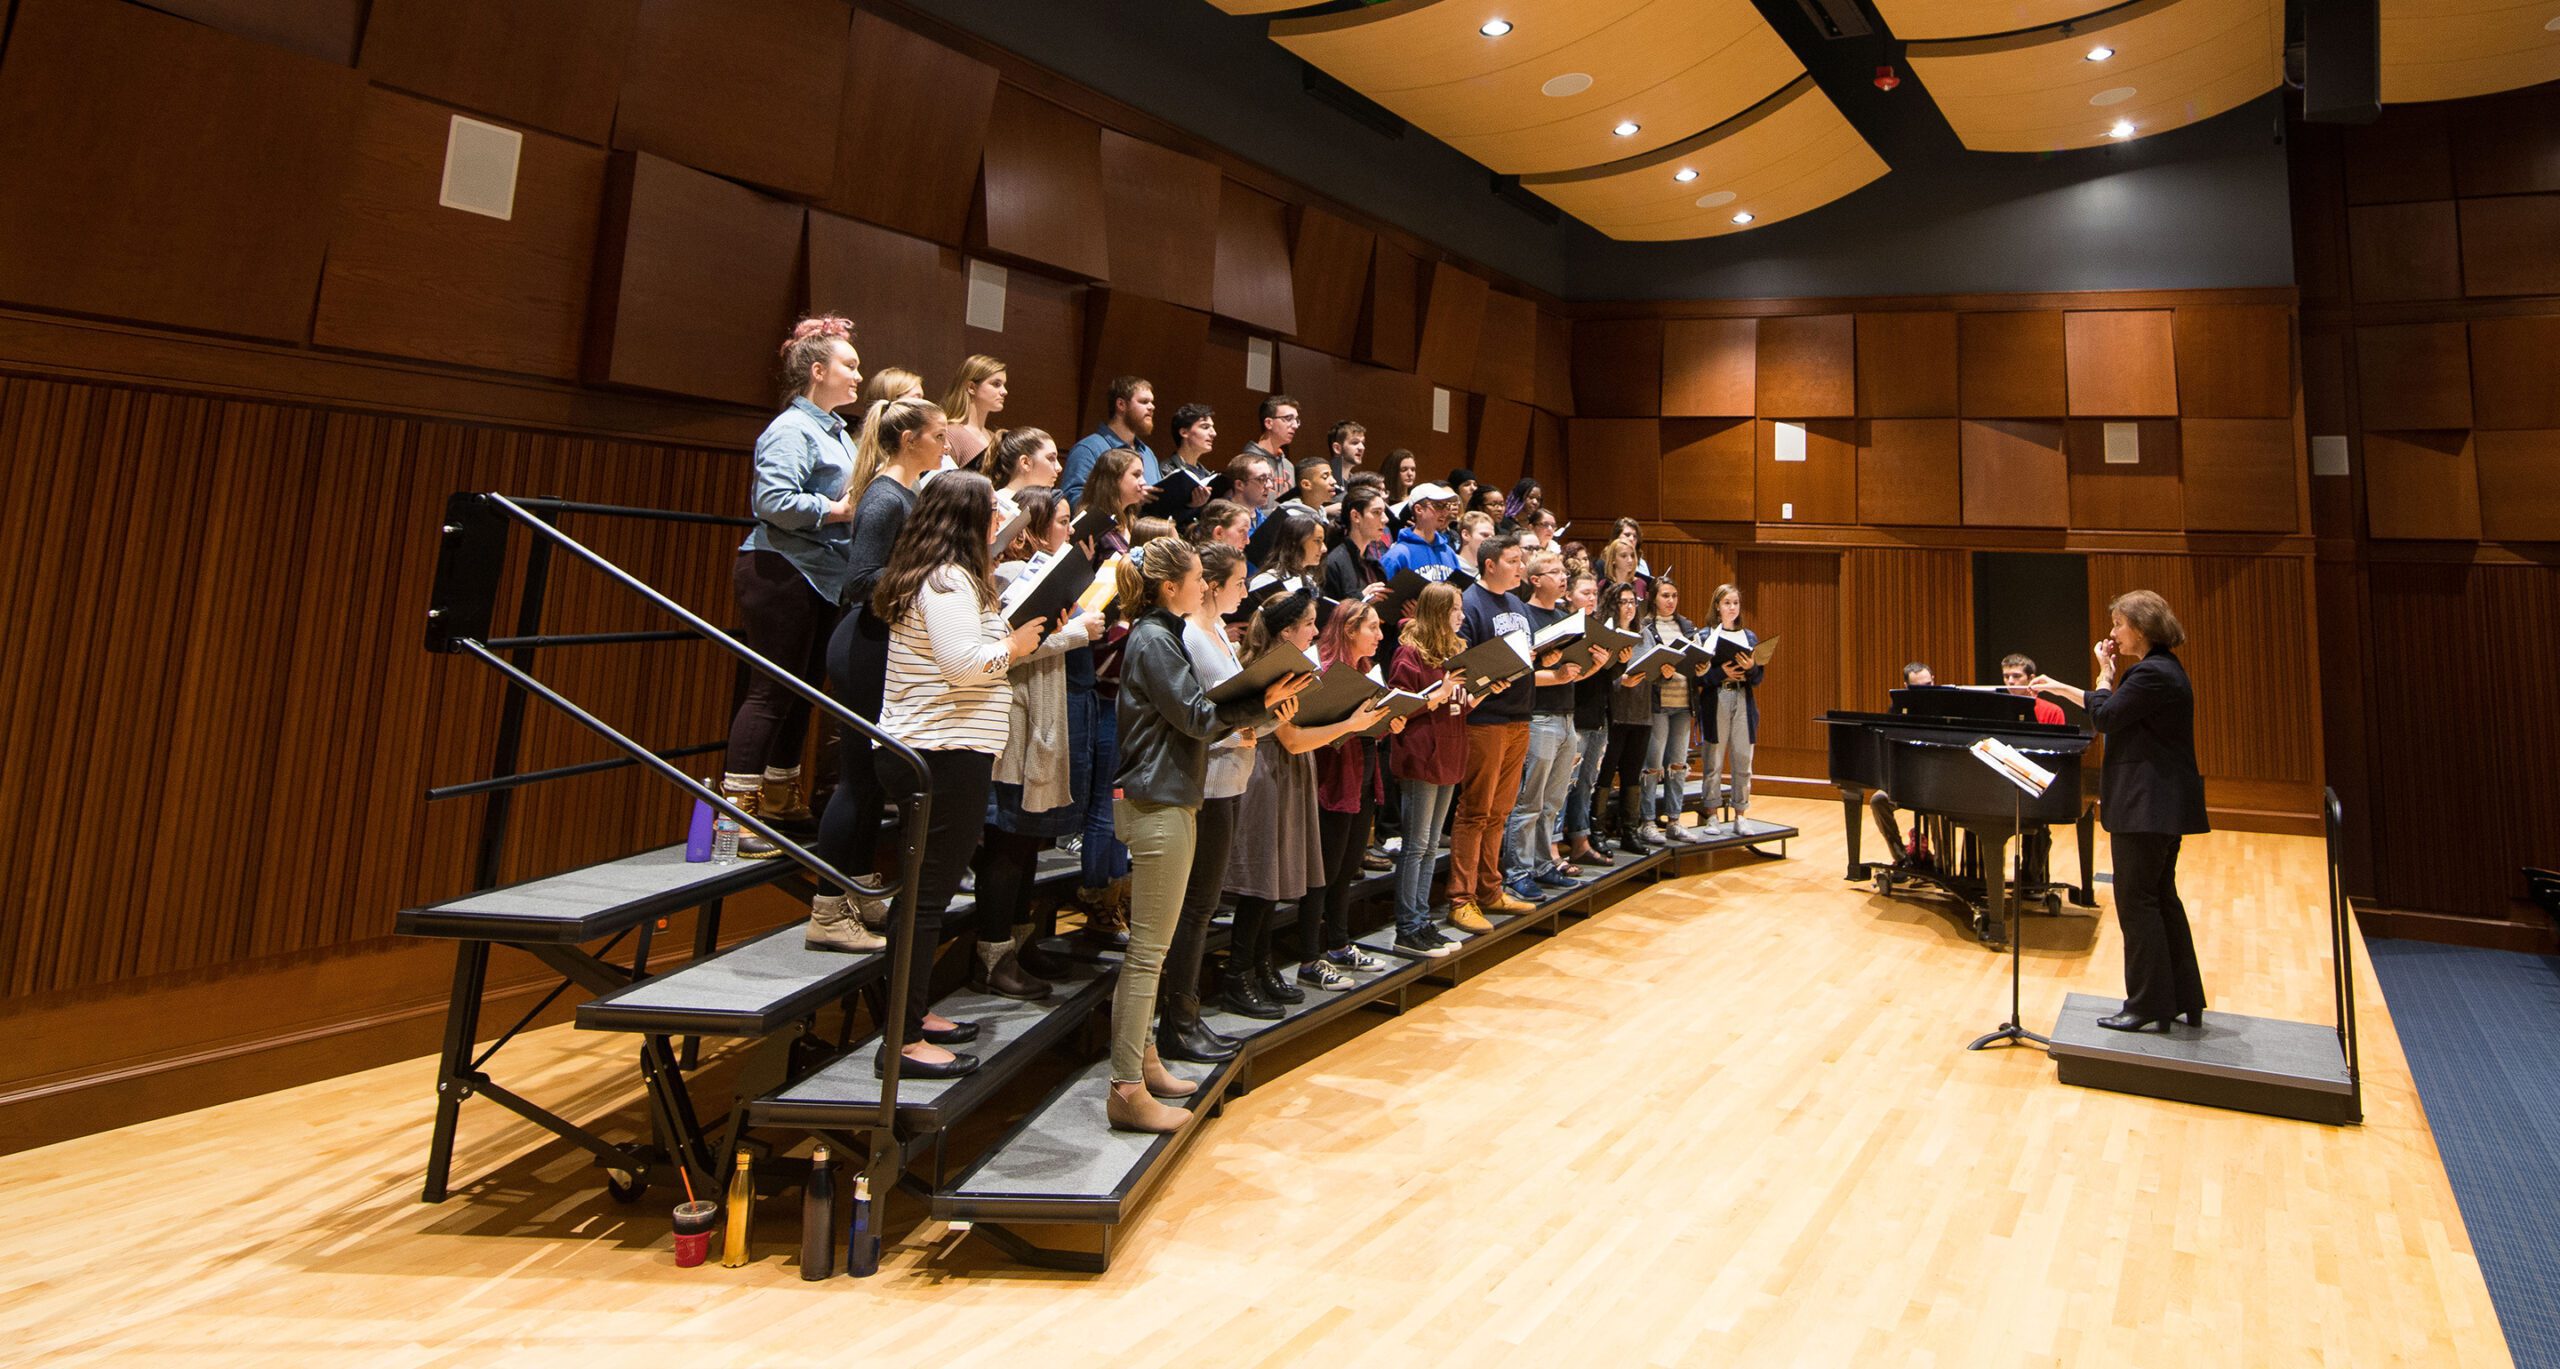 The Assumption College Chorale rehearses in the Jeanne Y. Curtis Auditorium.